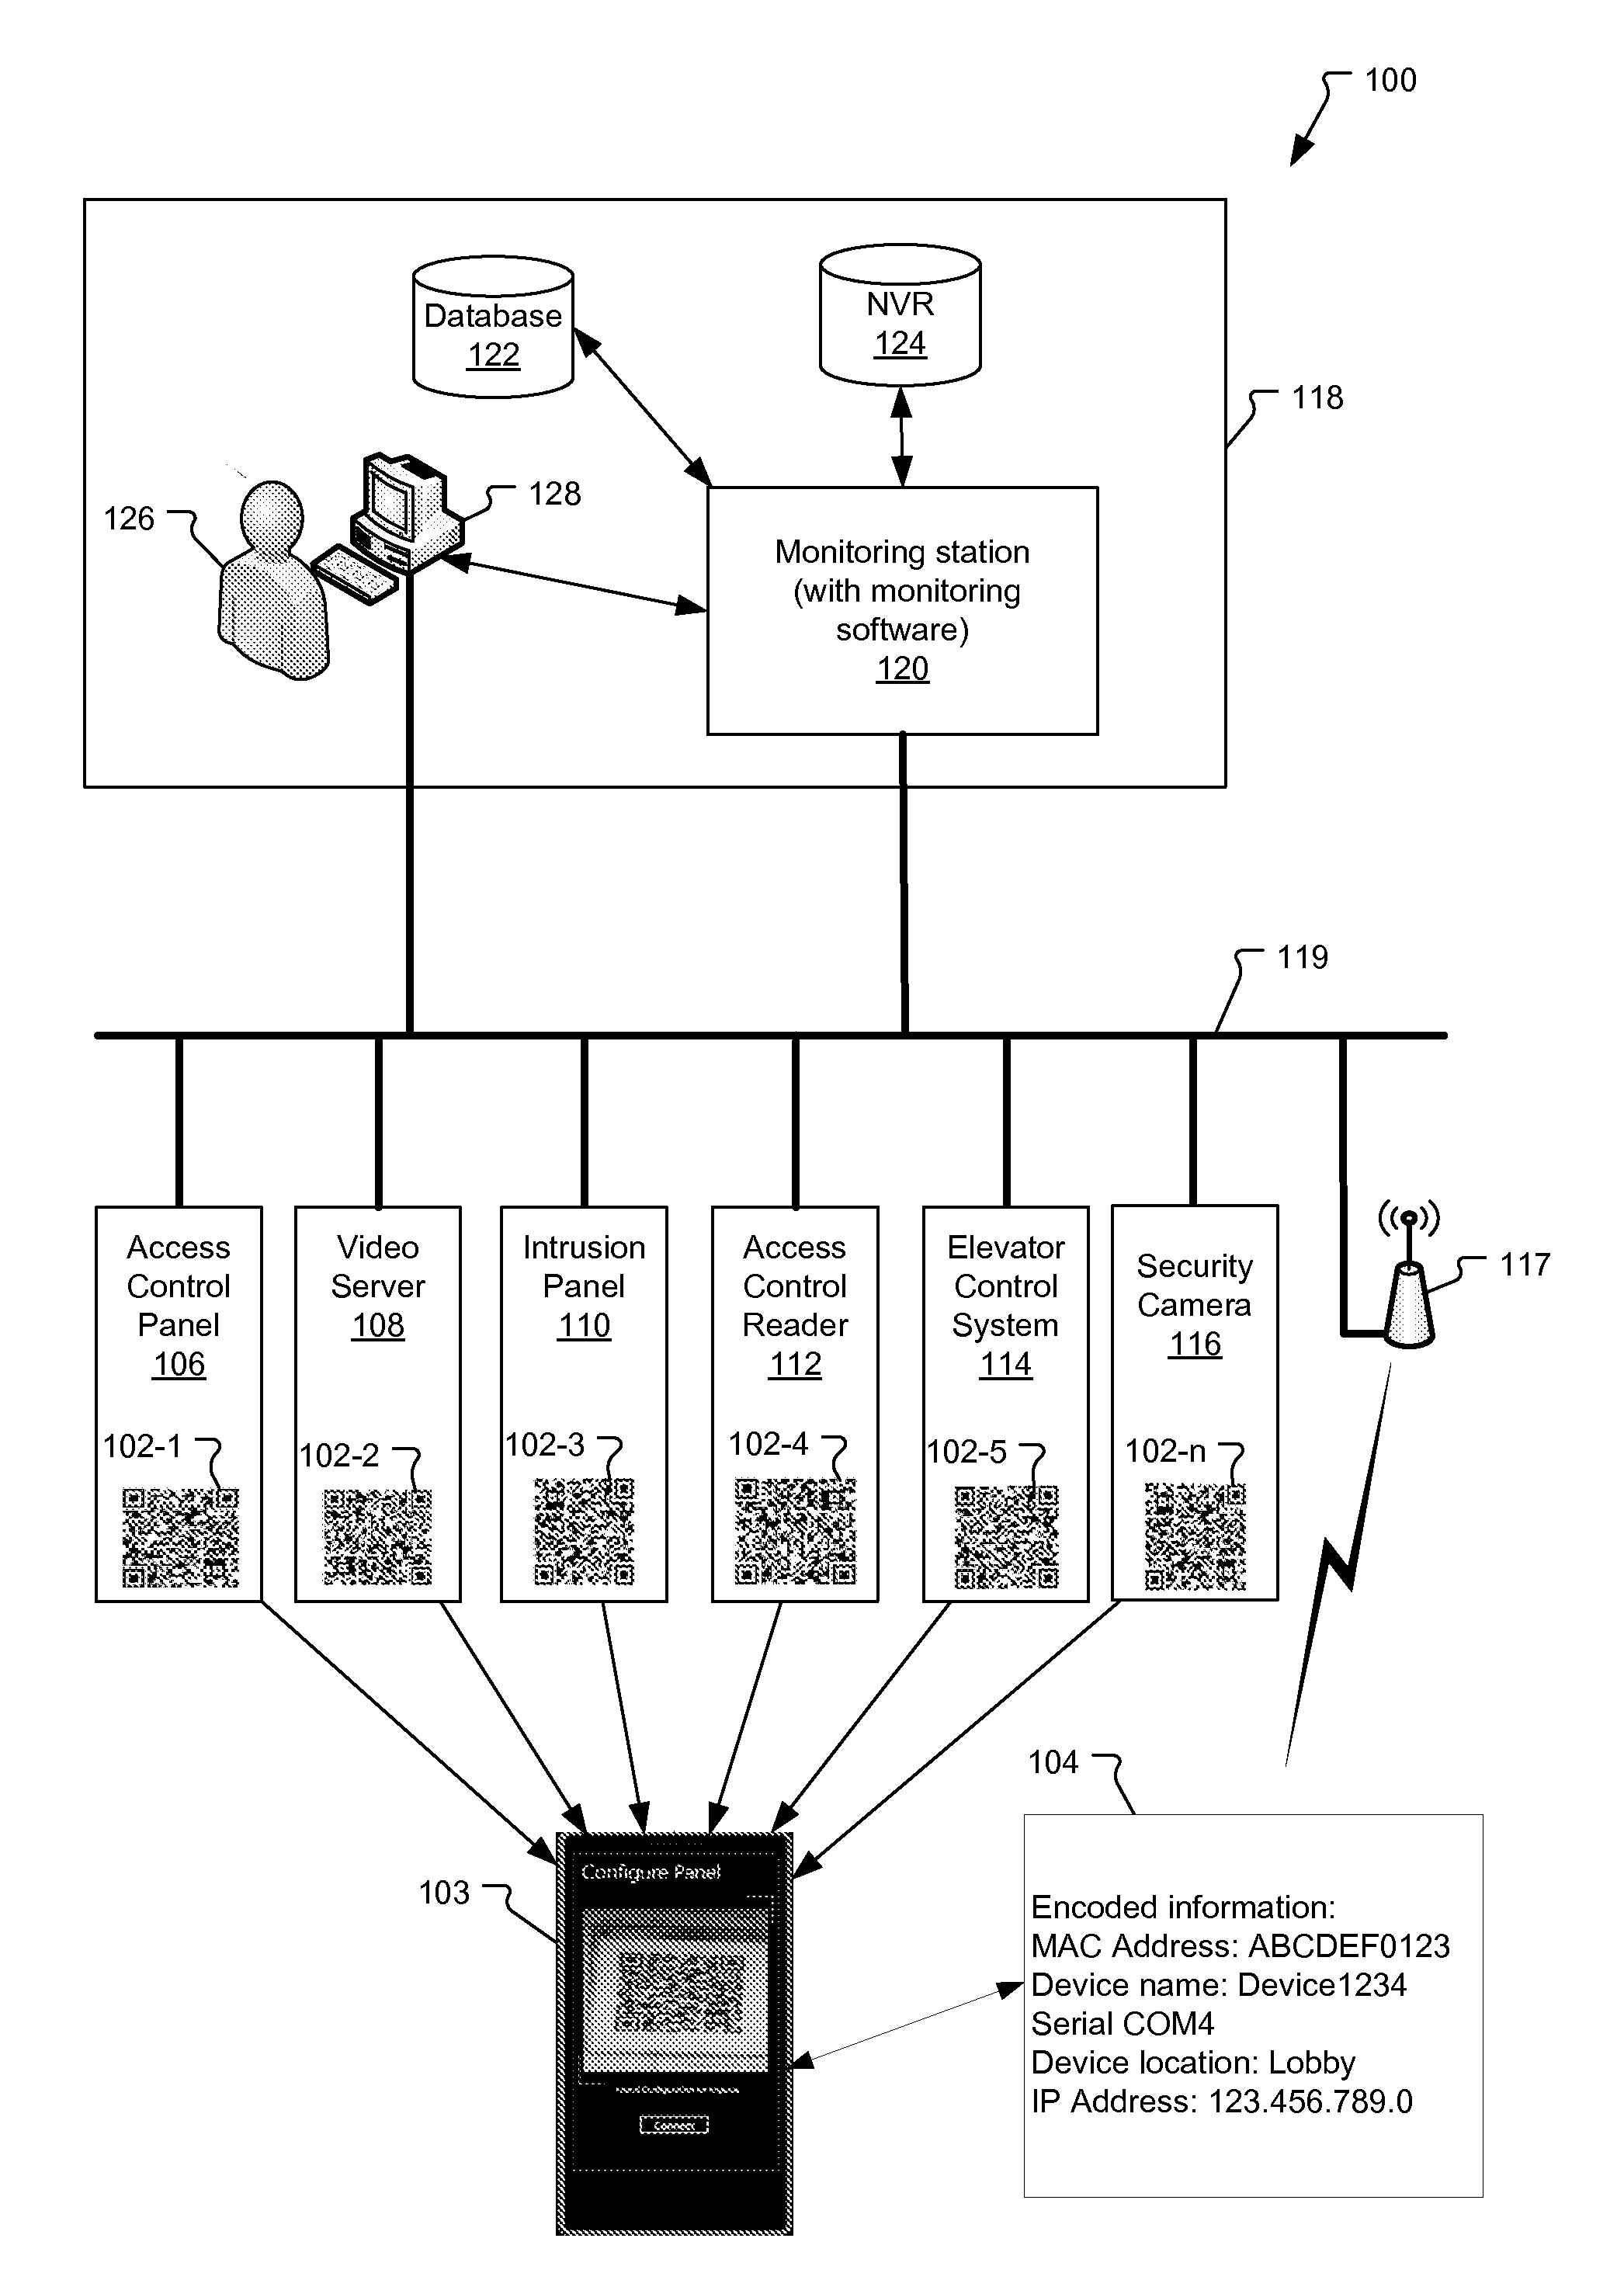 Configuration of Security Devices Using Spatially-Encoded Optical Machine-Readable Indicia